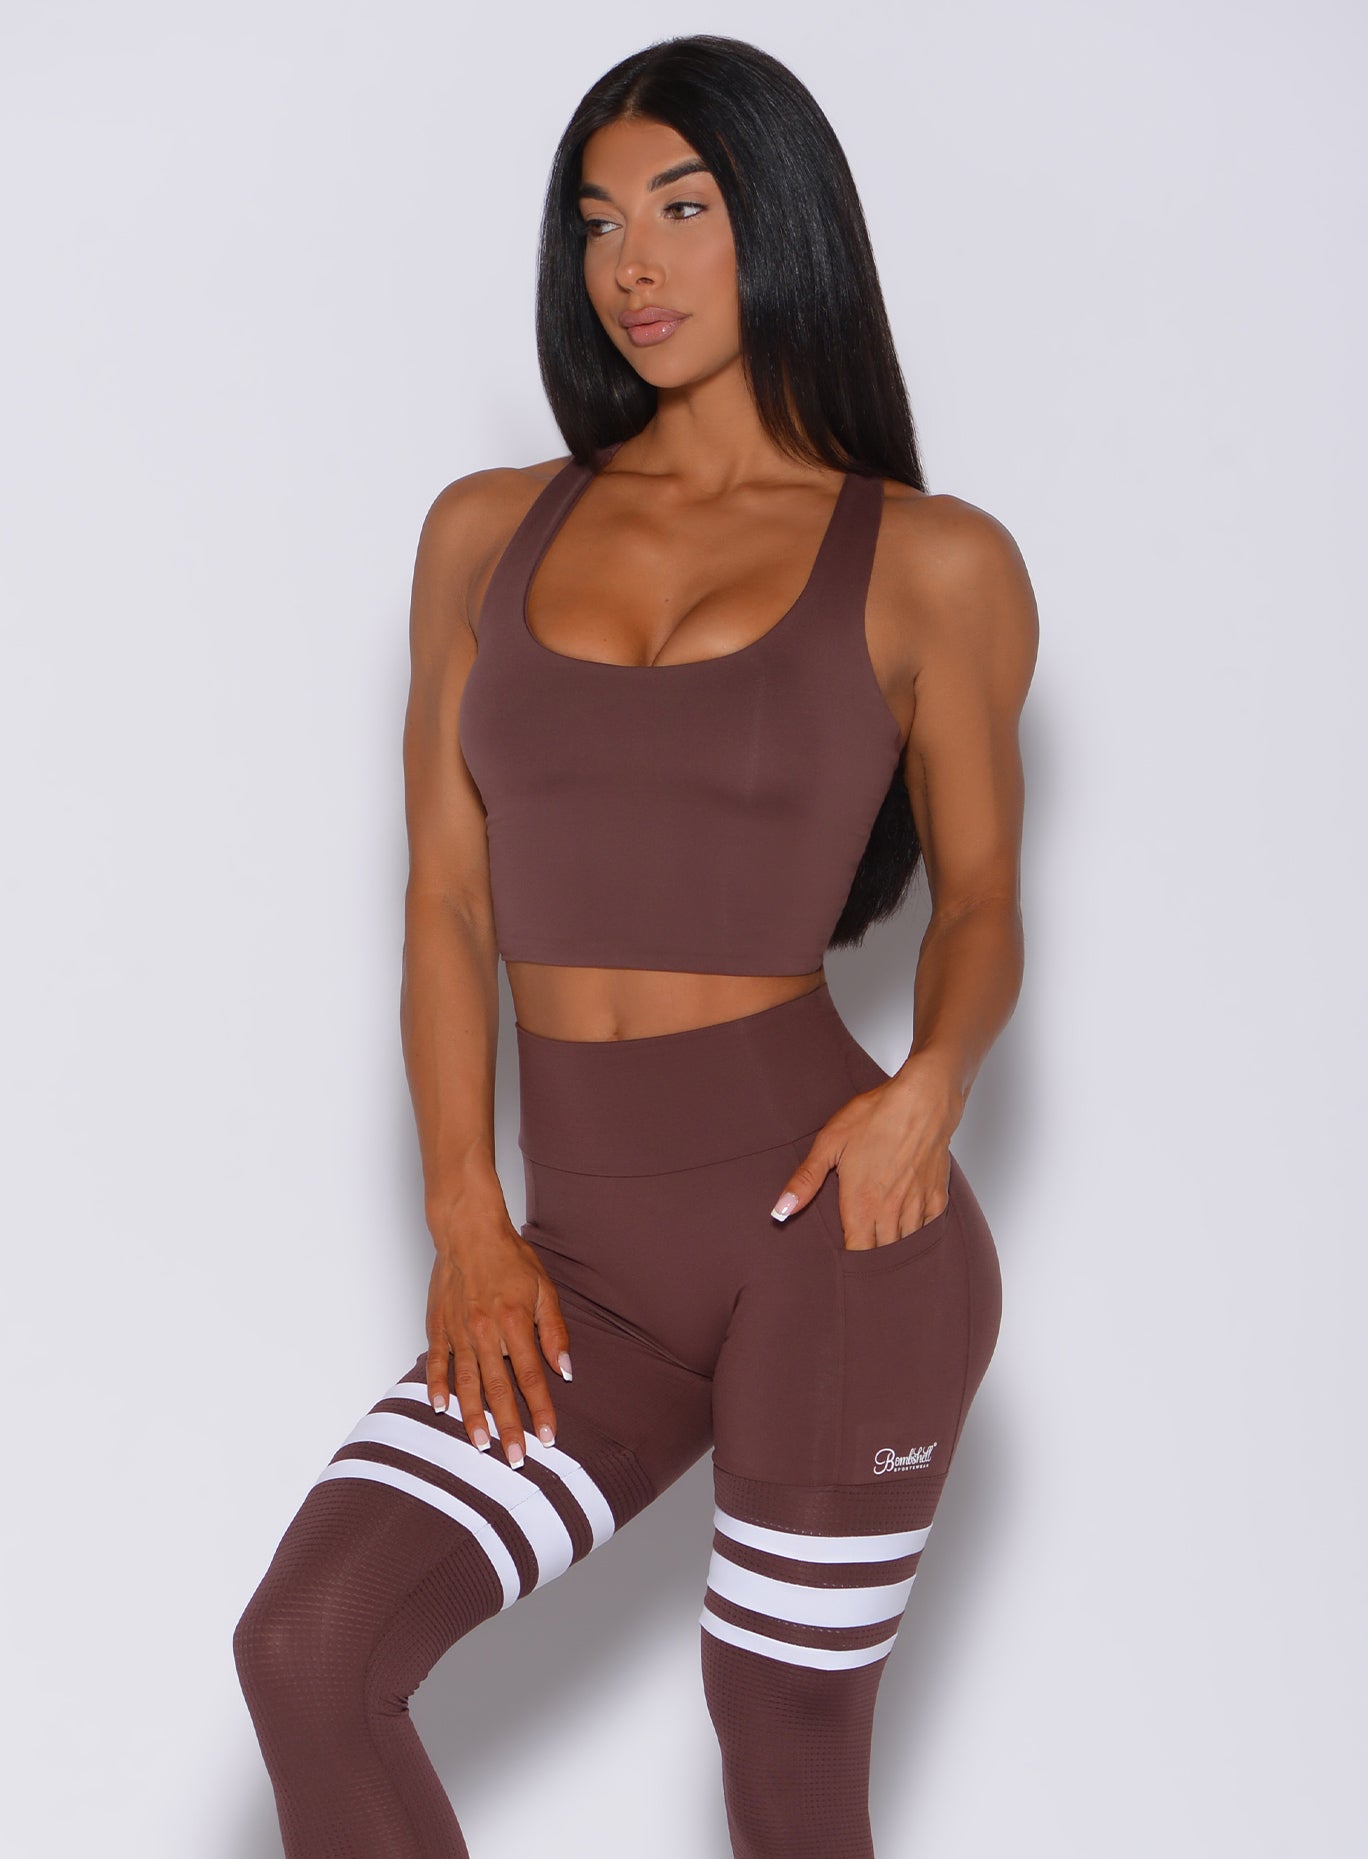 Front profile view of a model wearing our ultimate tank bra in chocolate color and a matching leggings